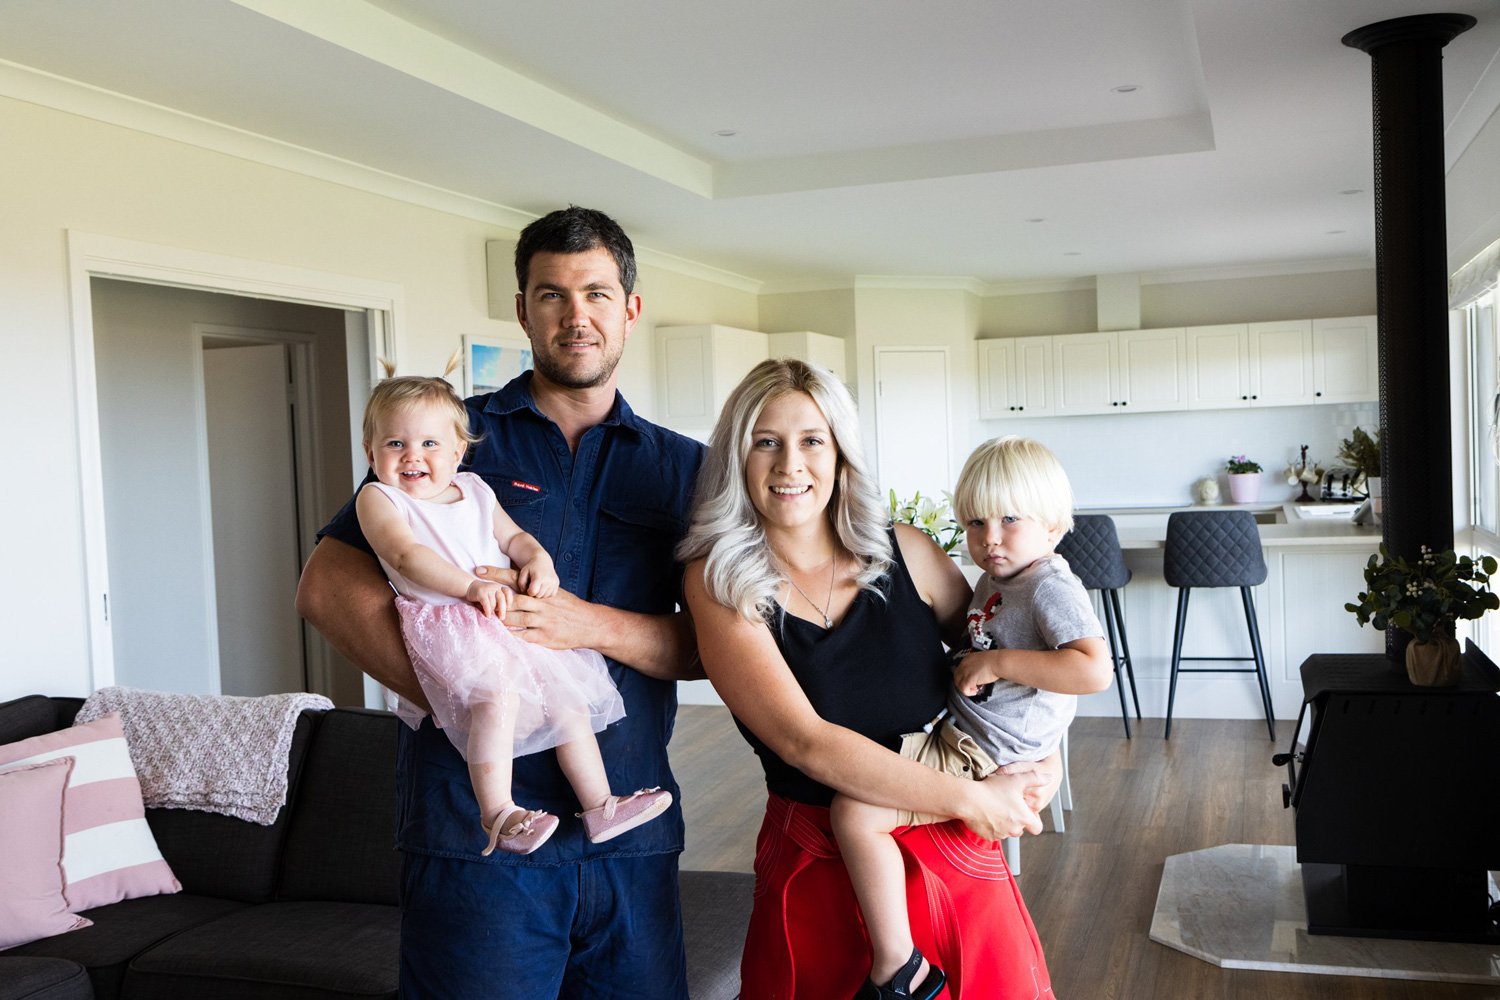 New modular home for a family in Regional WA